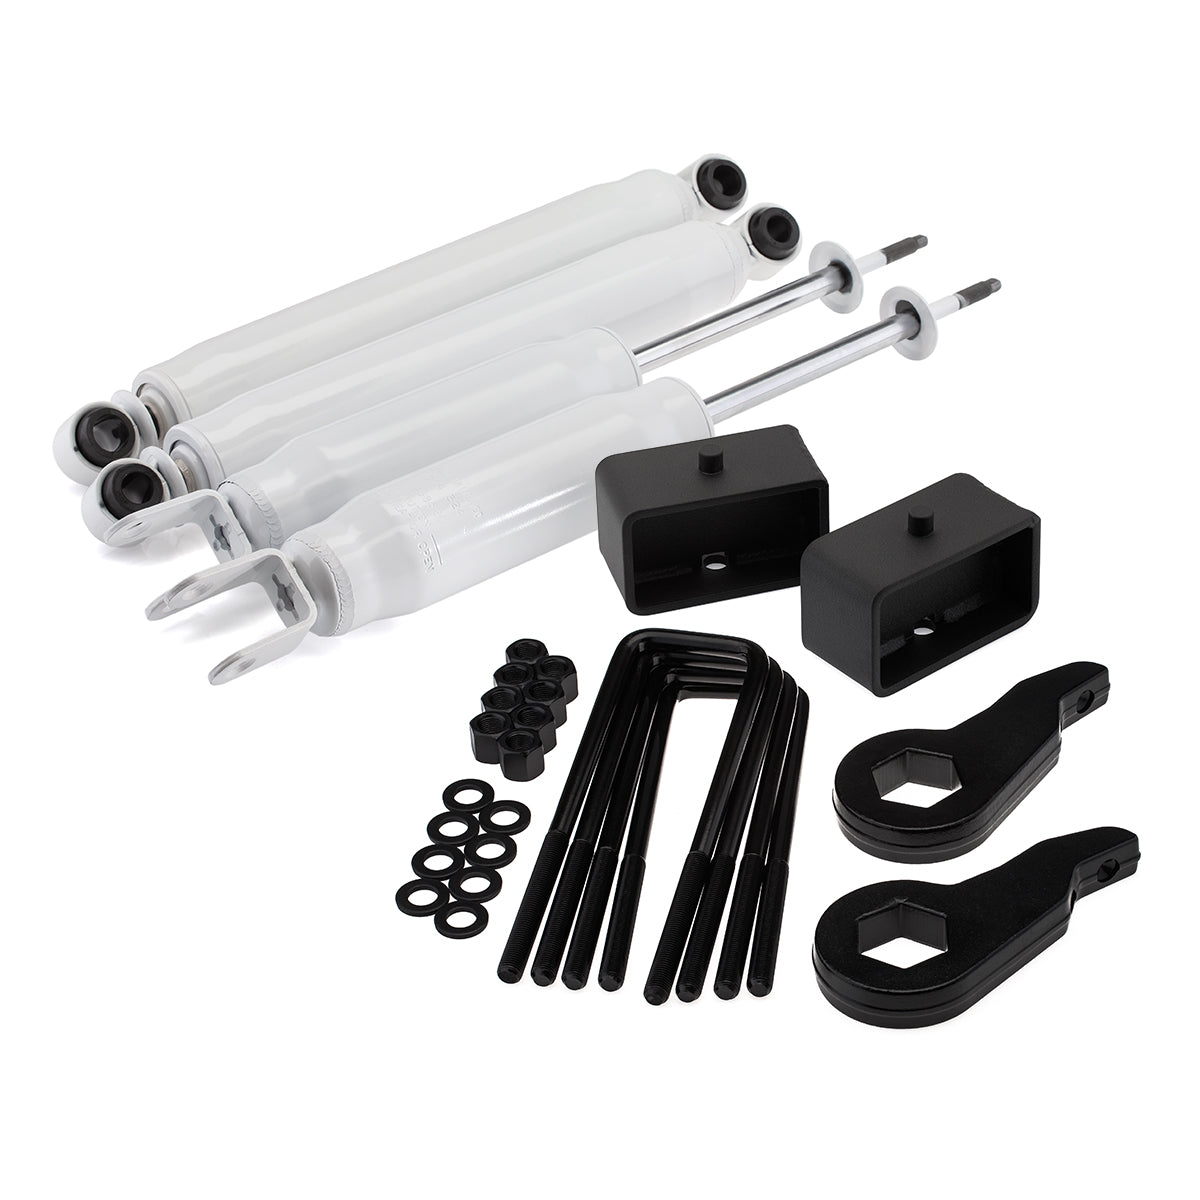 1999-2007(CLASSIC) CHEVROLET SILVERADO 1500 Full Lift Kit with Extended Shocks and Torsion Key